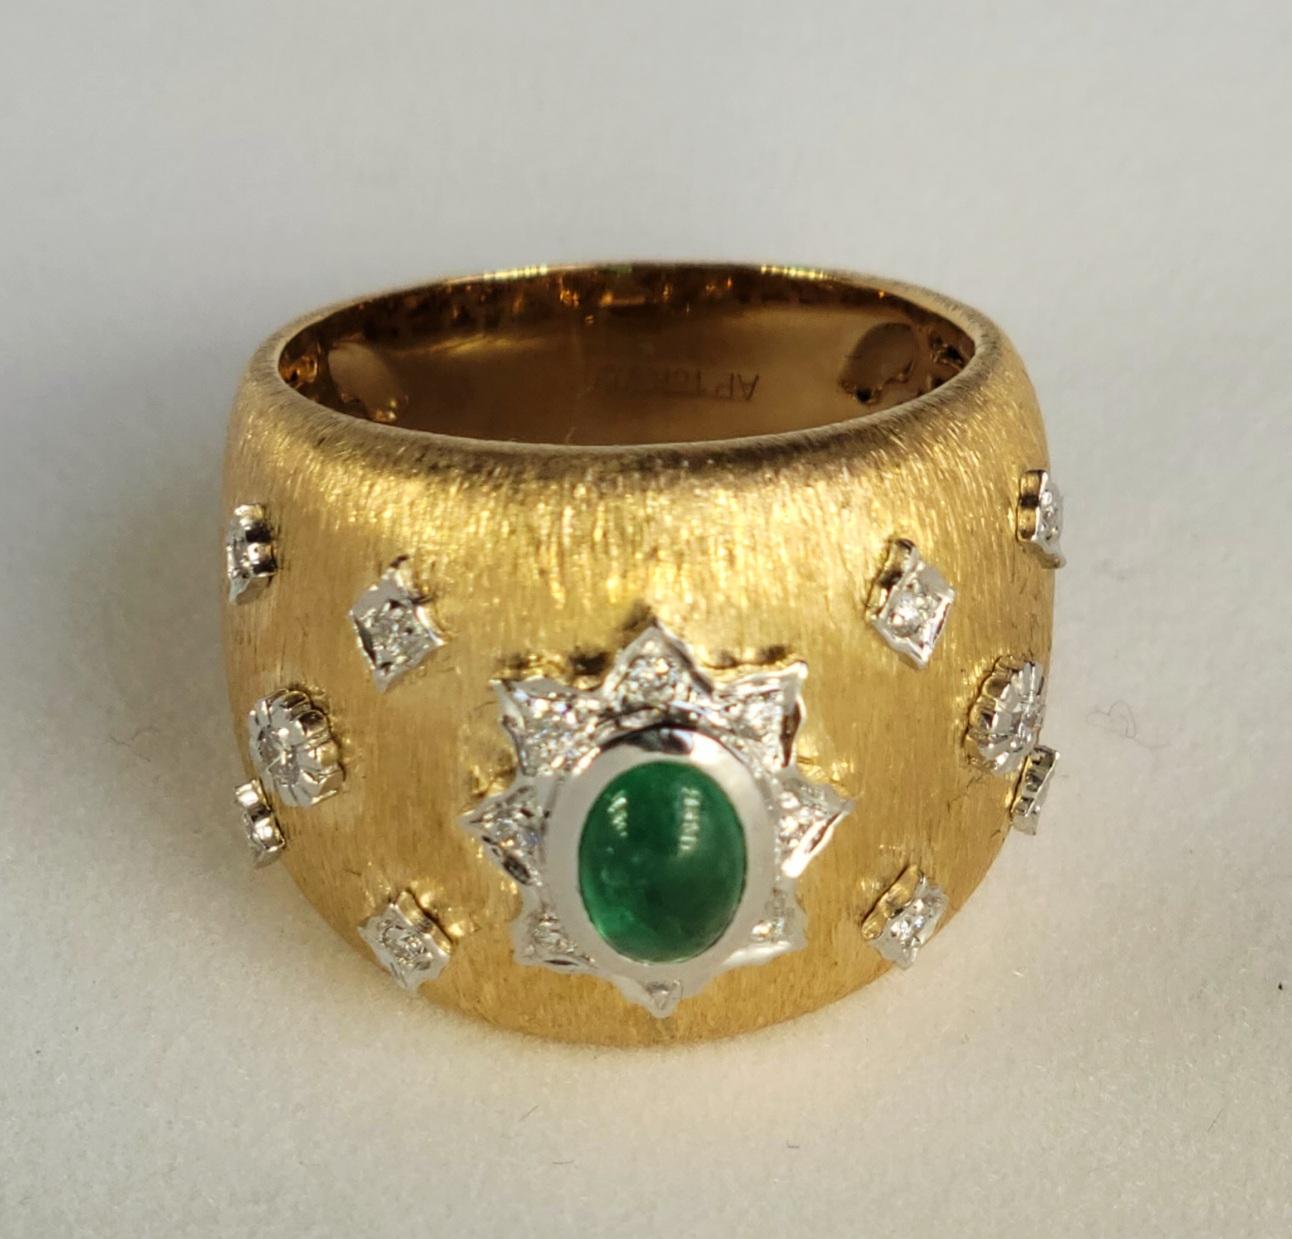 EMERALD Cocktail Ring with Diamonds in Florentine Finish inspired by Buccellati
1 EMERALD - 0.50cts 
18 ROUND DIAMONDS - 0.14cts
18K WHITE AND YELLOW GOLD - 11.86gm
SIZE - US 6.5 

can be made to your size. lead time is 3-4 weeks max

This unique